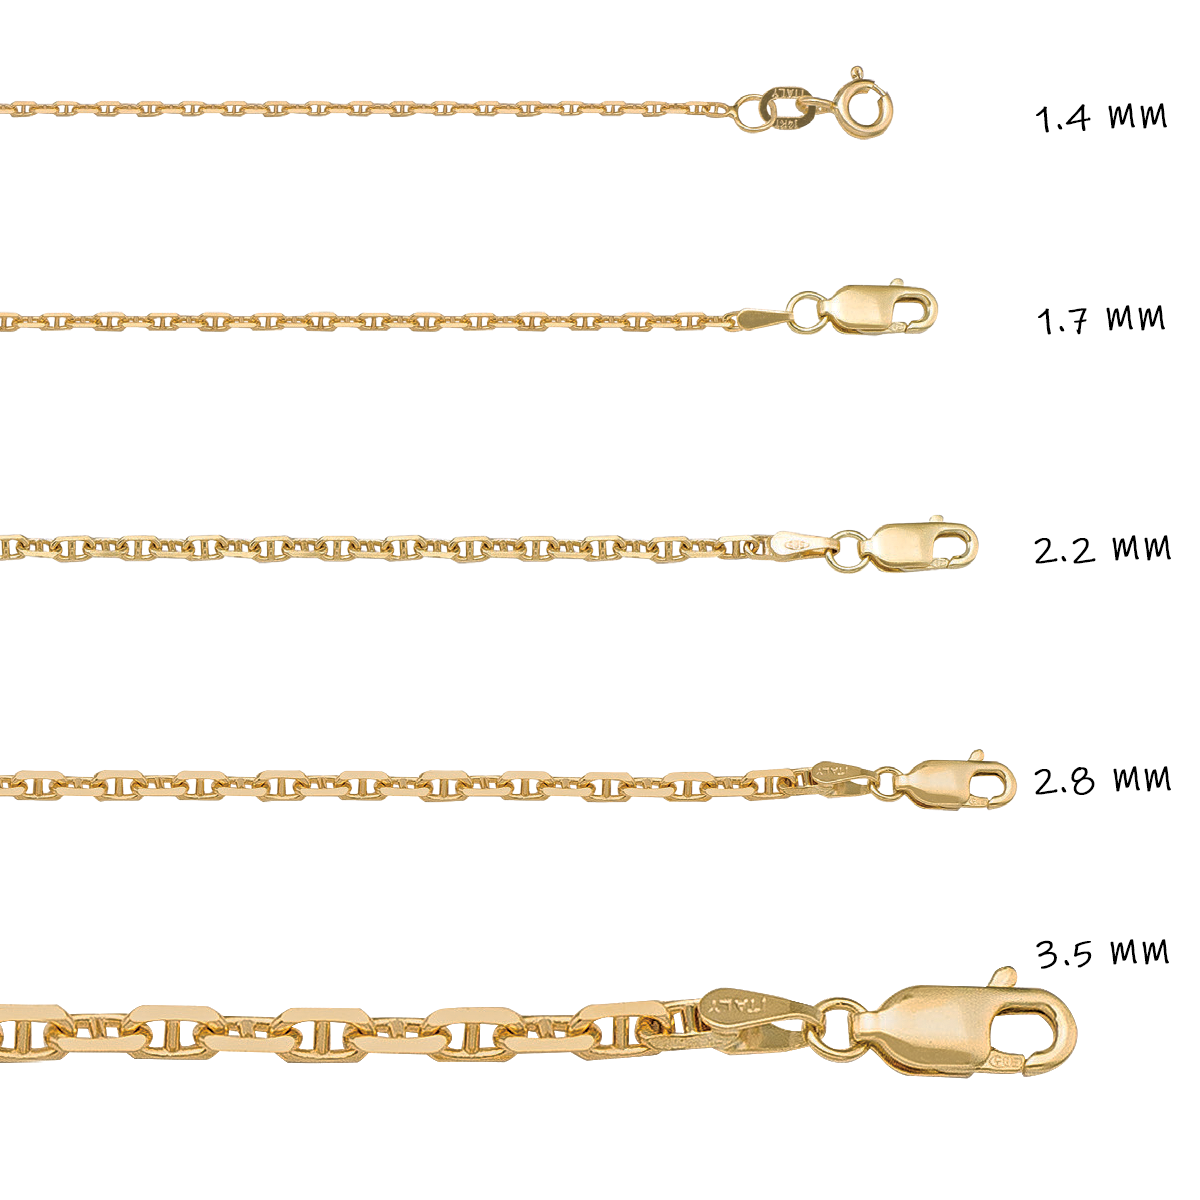 CANC01B, Gold Chain, Anchor, 1.7 mm, Yellow Gold